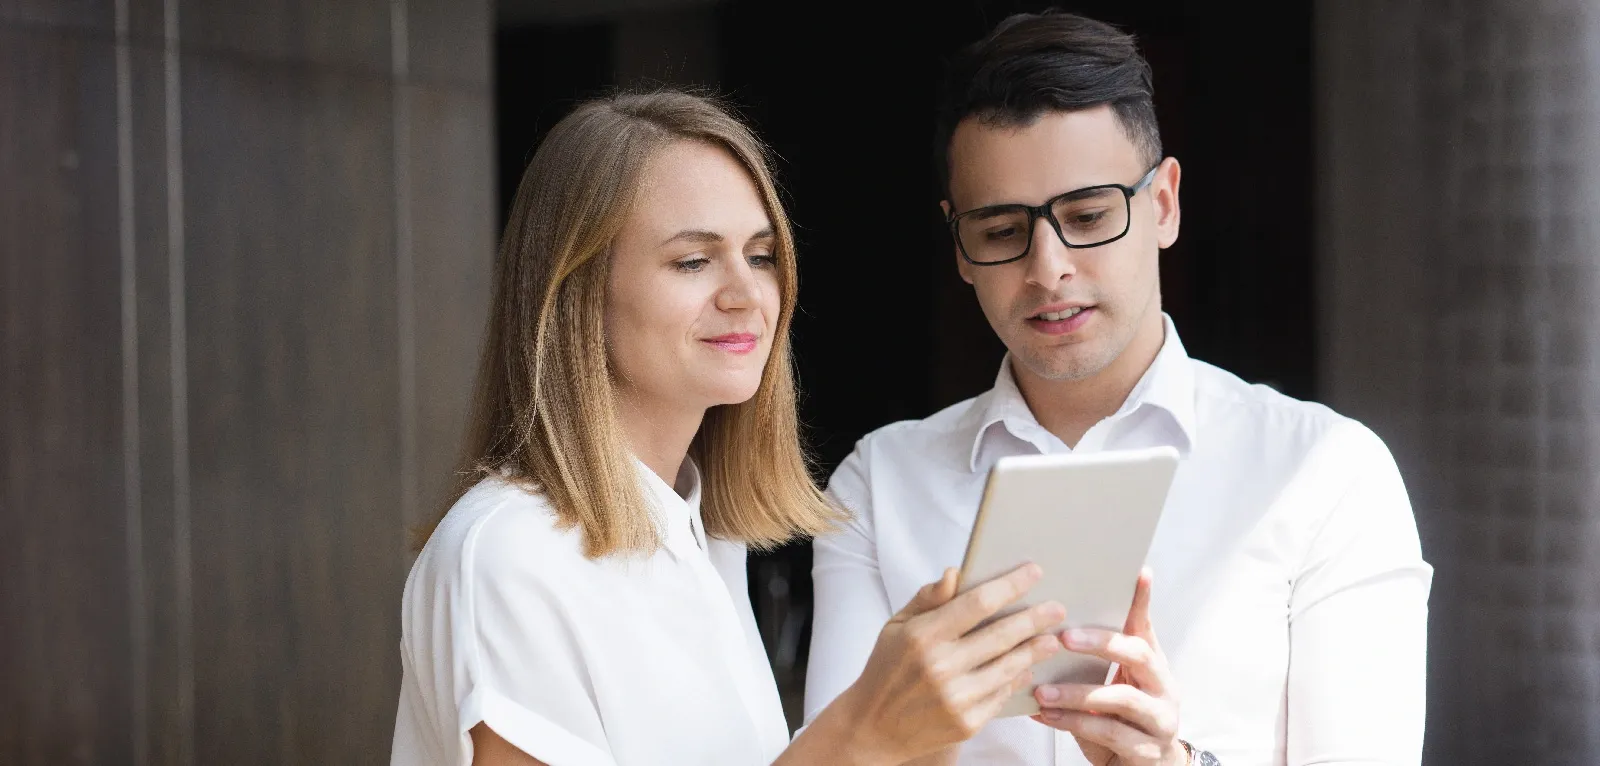 A man and woman in white collared shirts look at a tablet together